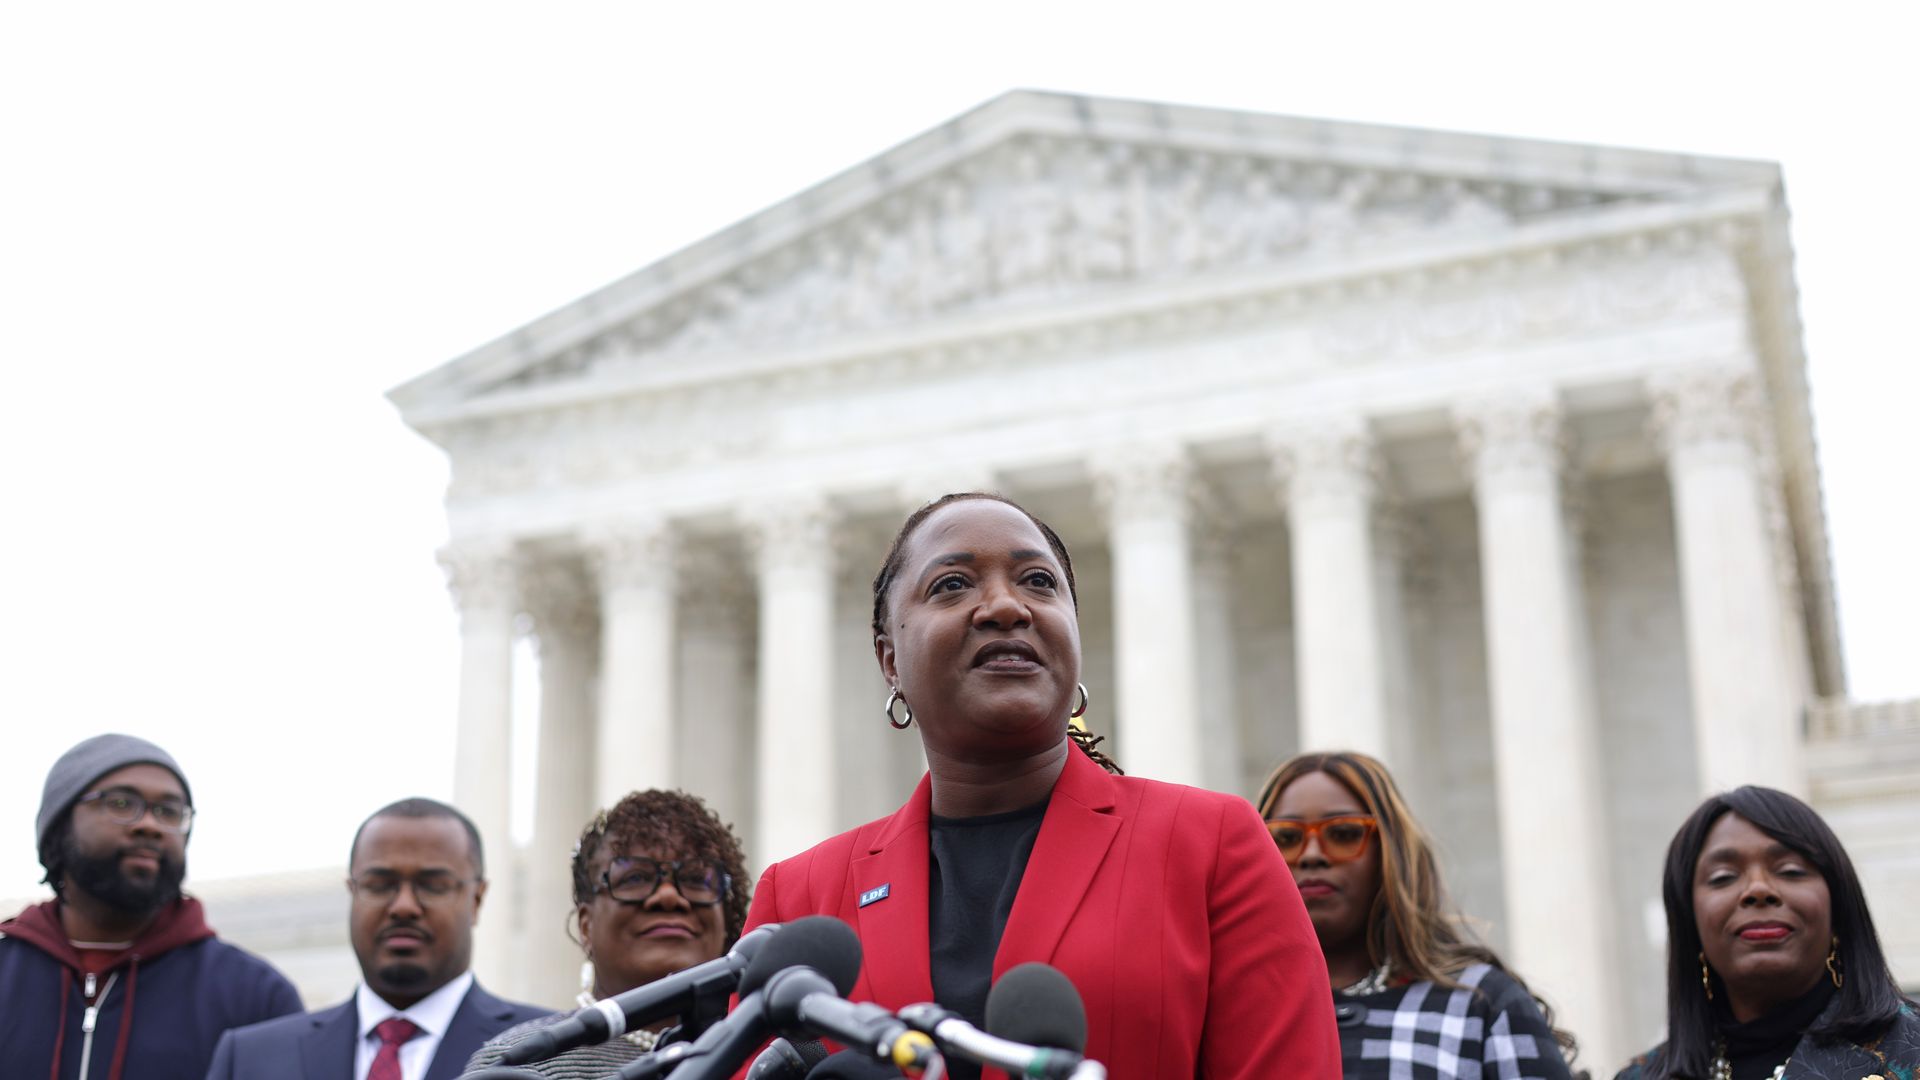 President and Director-Counsel of the NAACP Legal Defense Fund (LDF) Janai Nelson (C) speaks to members of the press after the oral argument of the Merrill v. Milligan case at the U.S. Supreme Court on October 4, 2022 in Washington, DC. 